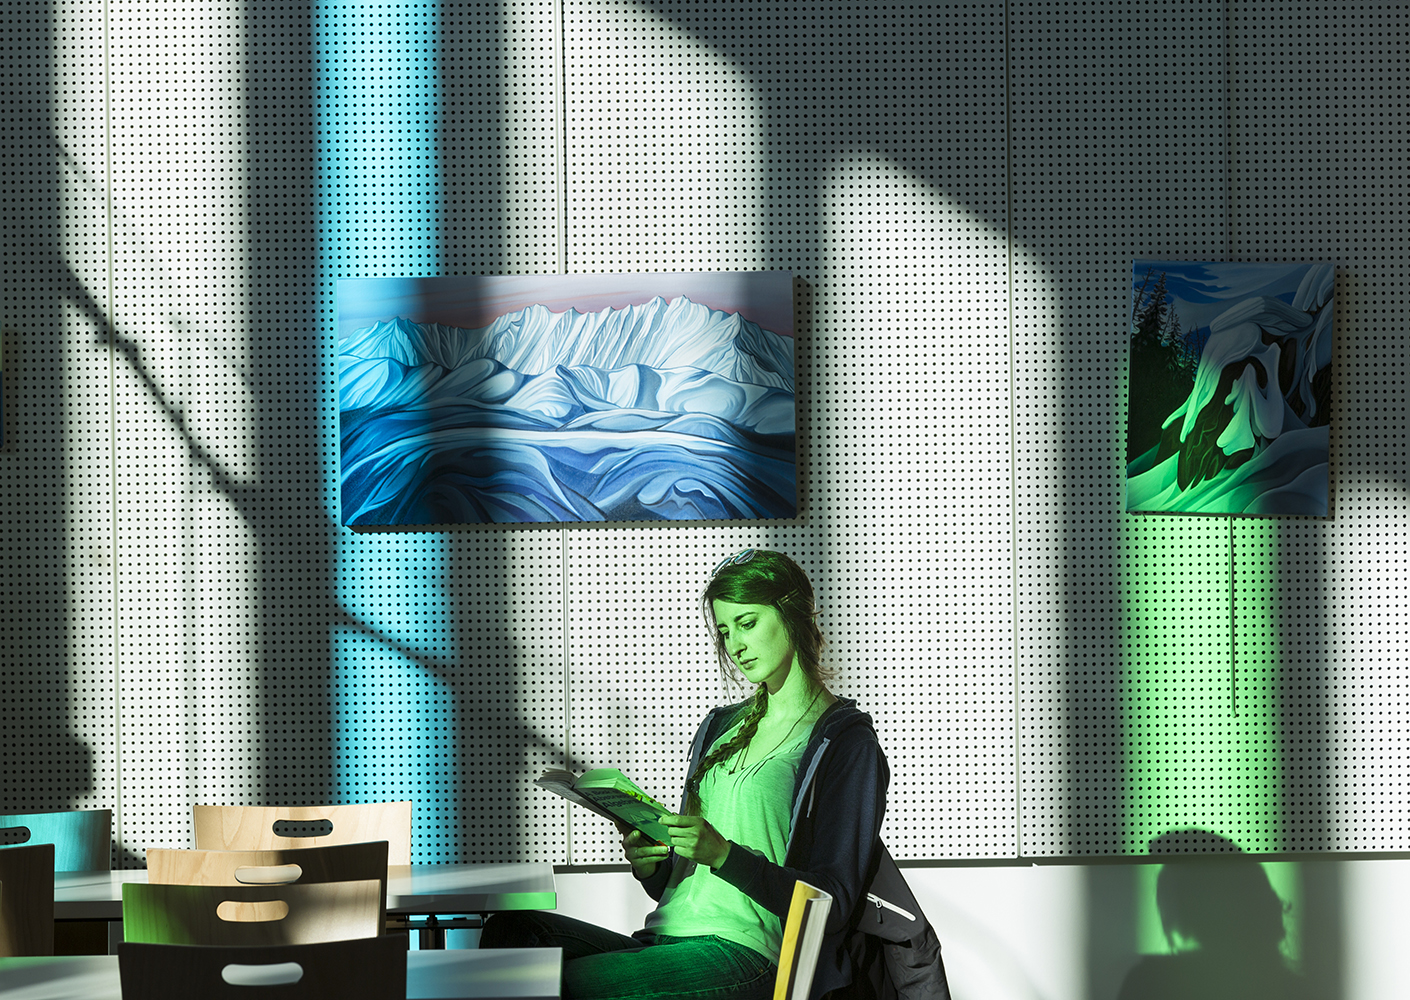 Girl reading at table with bright blue and green shadows casting on her and the wall behind her